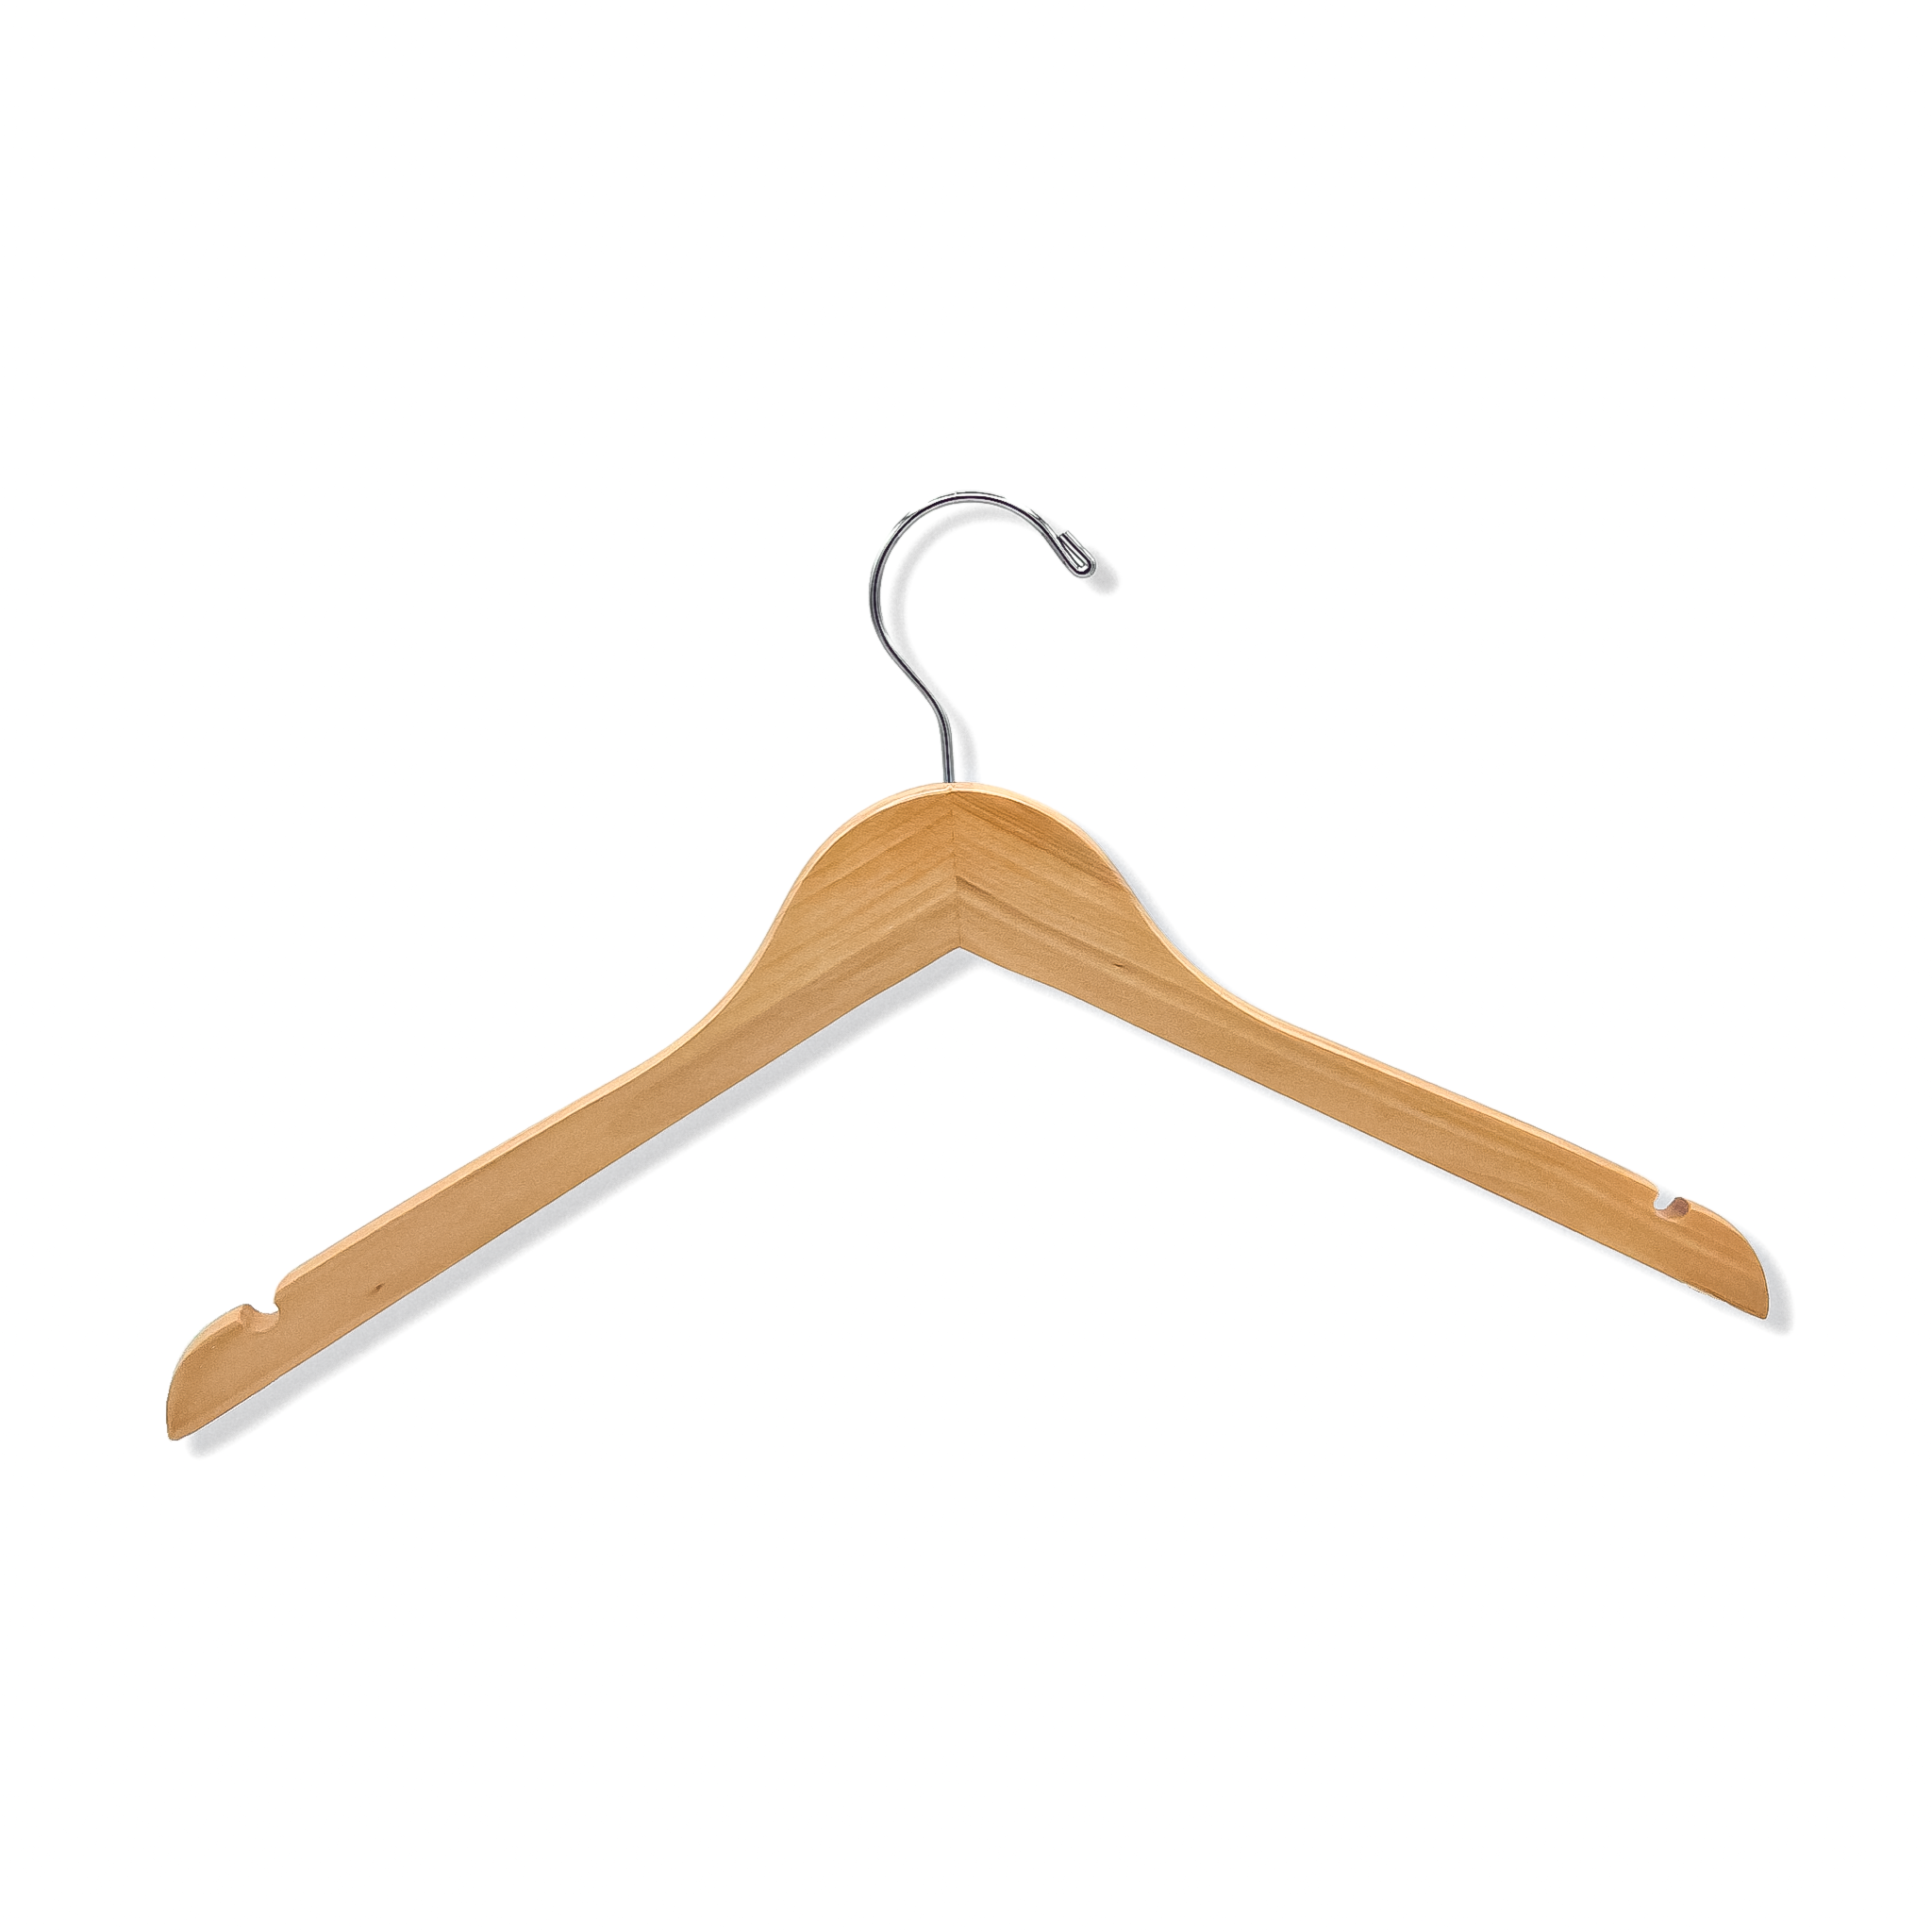 A Natural Maple Wooden Adult Top Hanger with shoulder notches and a silver hook for residential homes and retail spaces